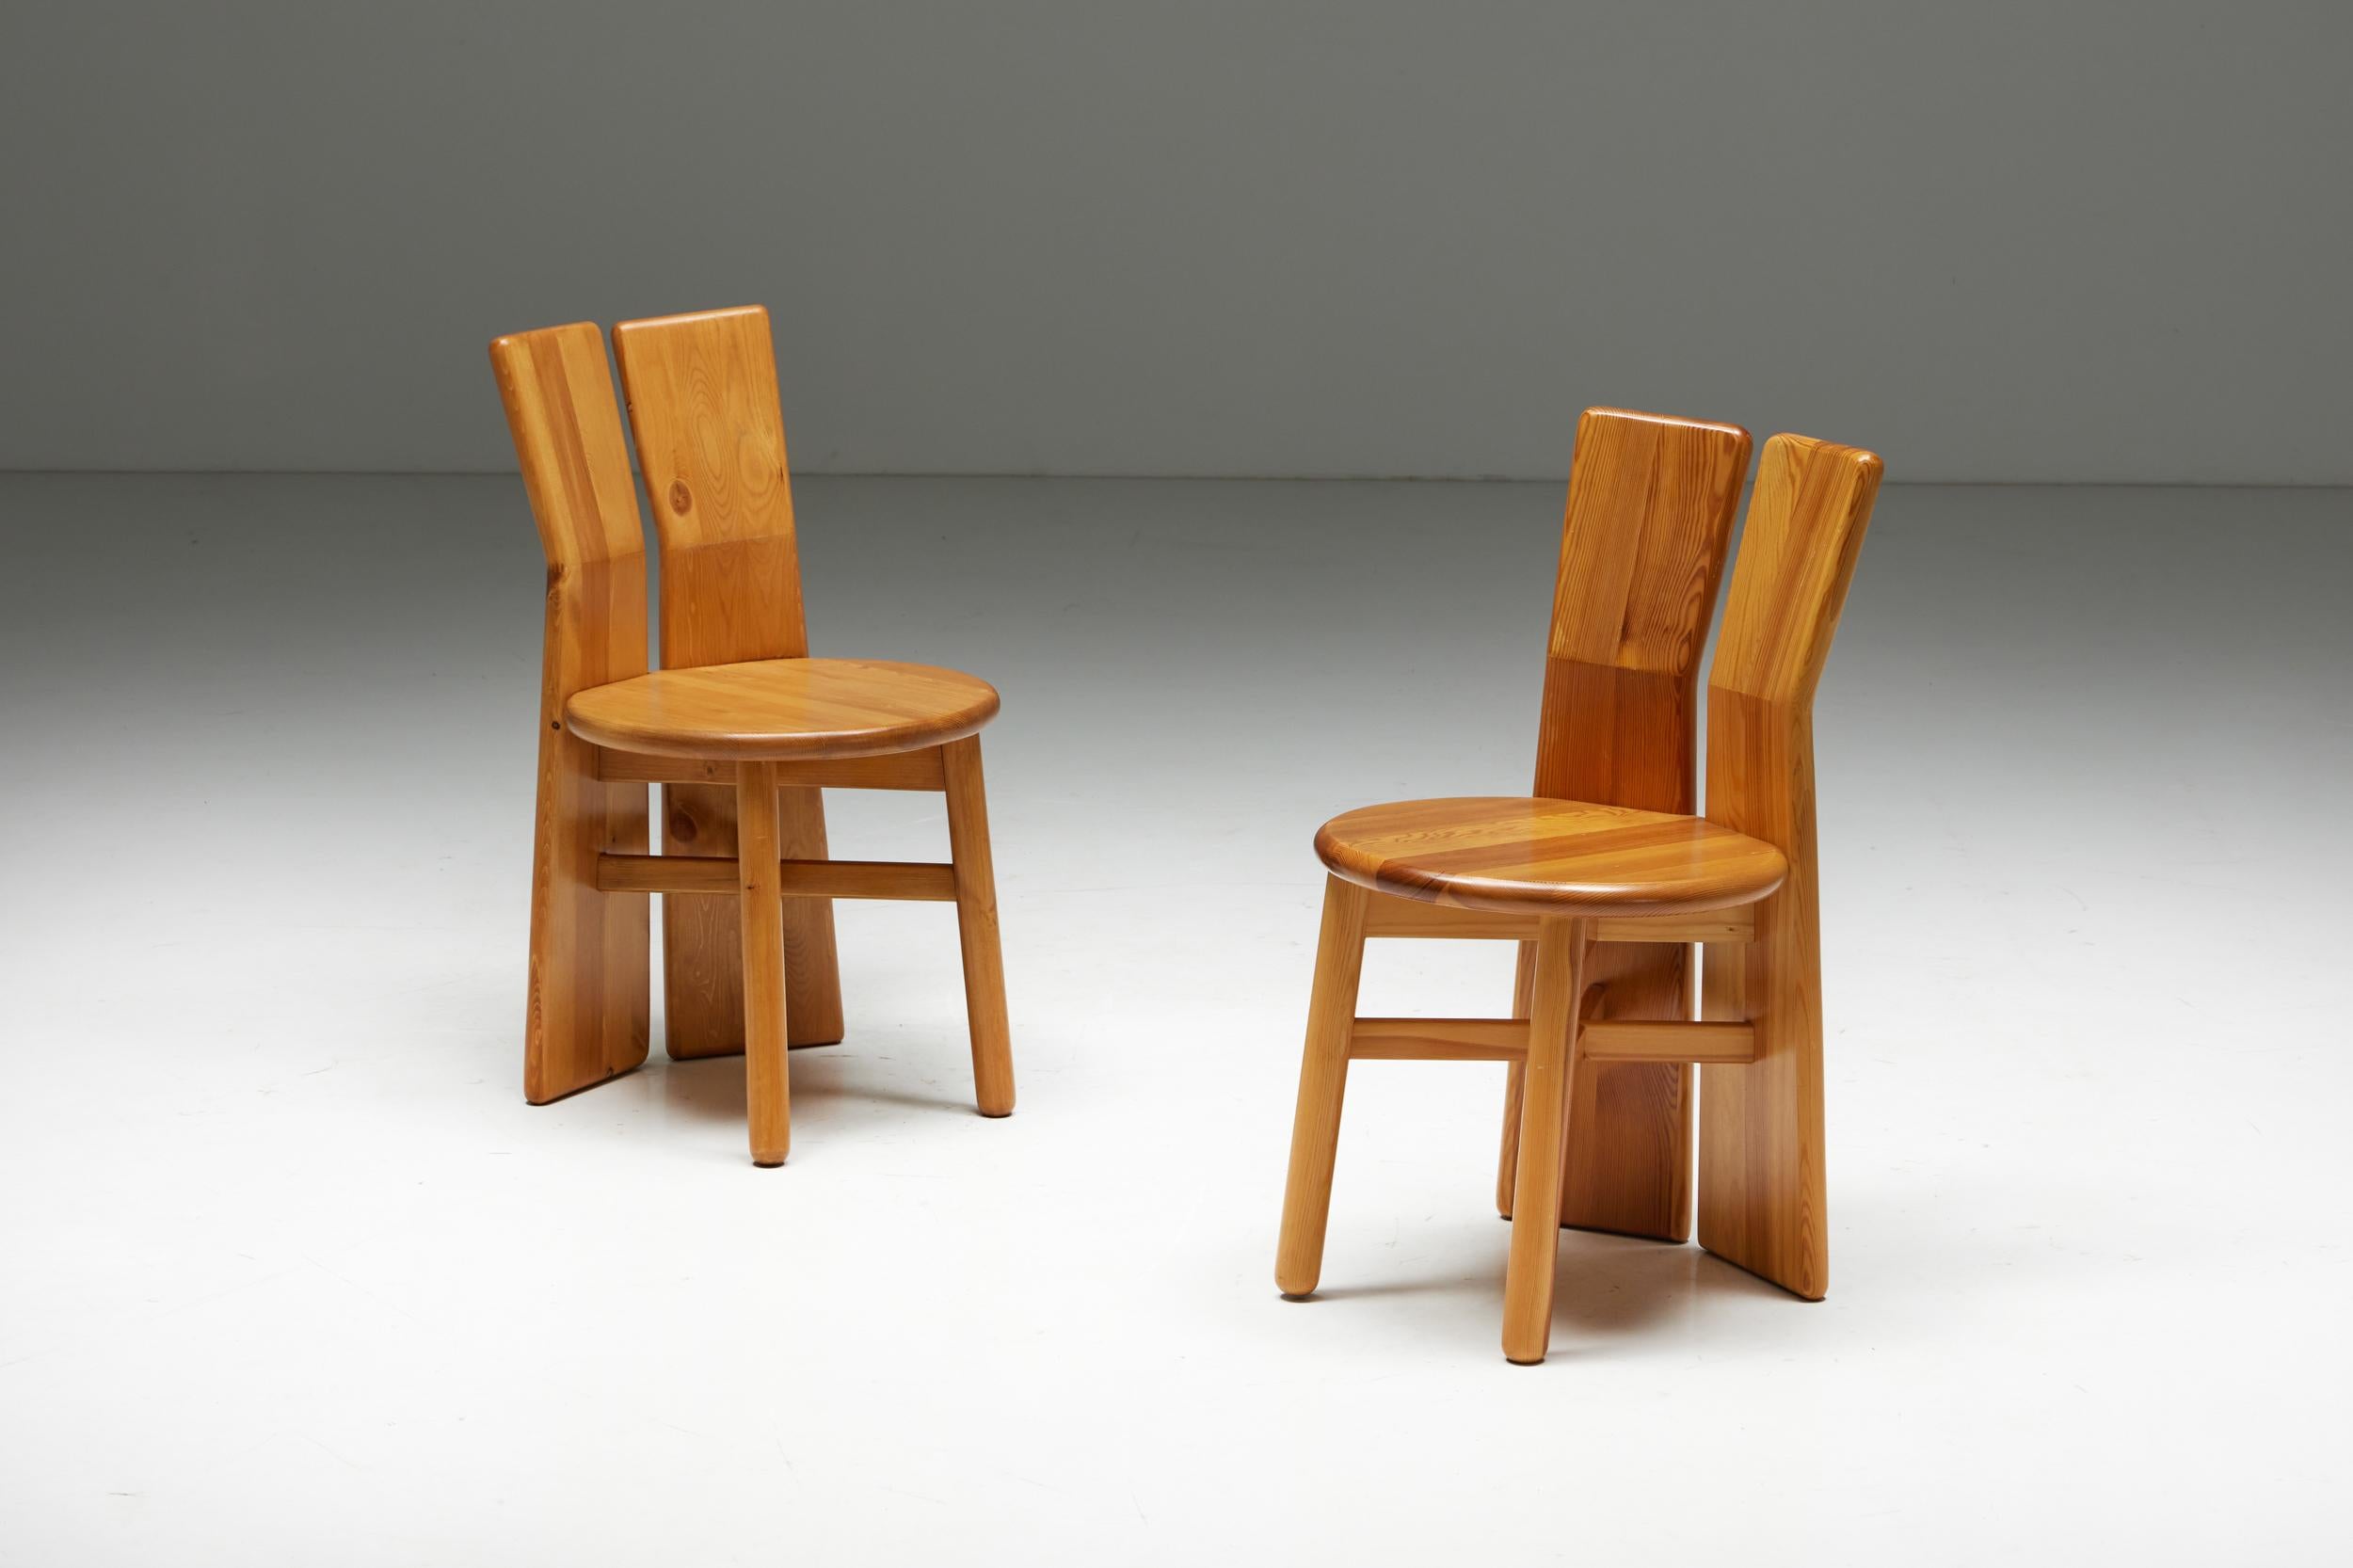 Italian Brutalist Pine Dining Chairs, Italy, 1970s For Sale 2